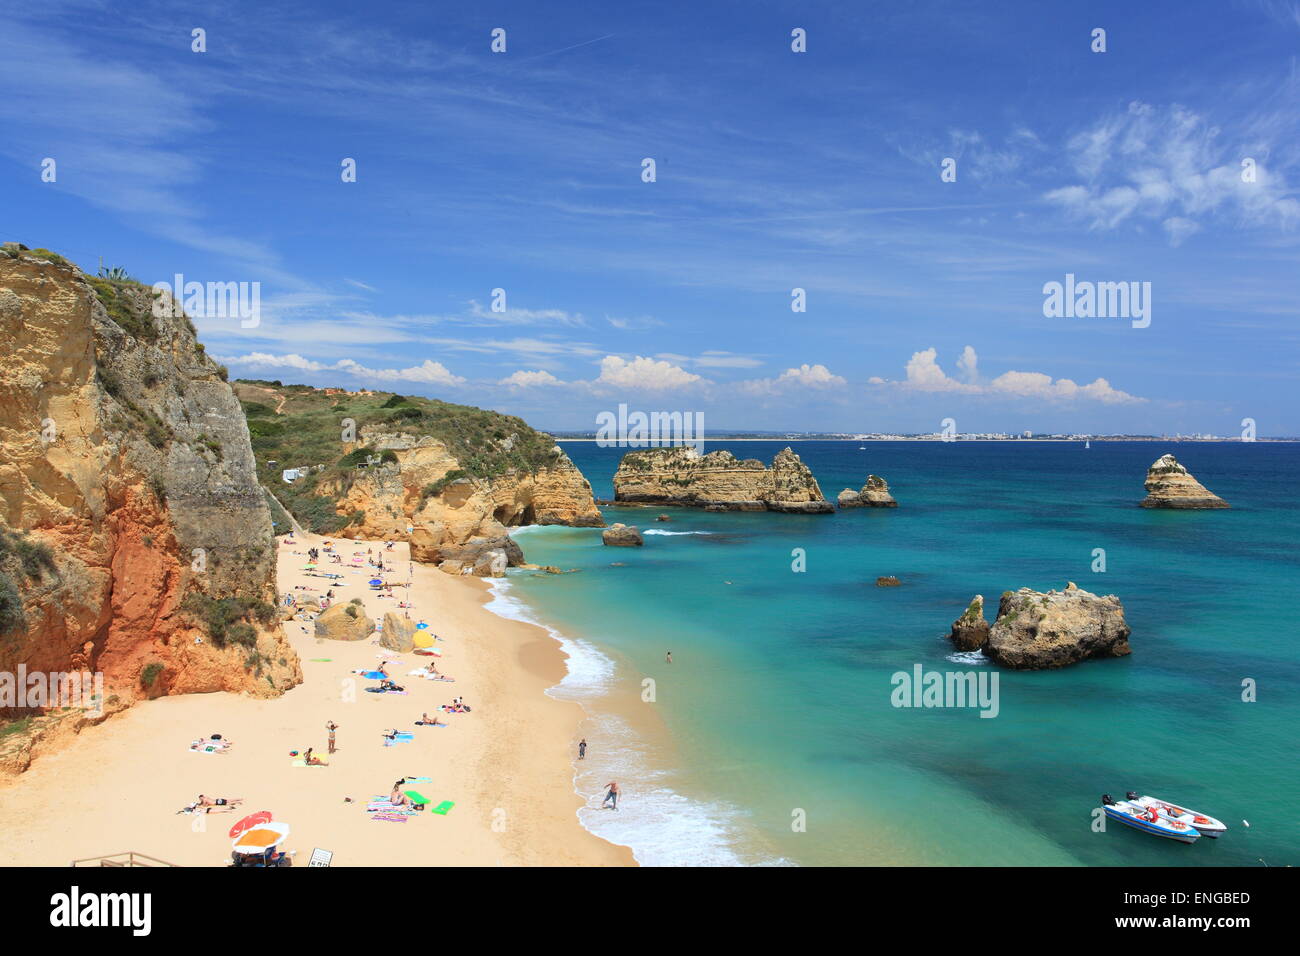 Overlooking the beach of Praia da Dona Ana at Lagos on the Algarve in Portugal. Popular with locals and tourists alike, it is a haven for sunbathers. Stock Photo